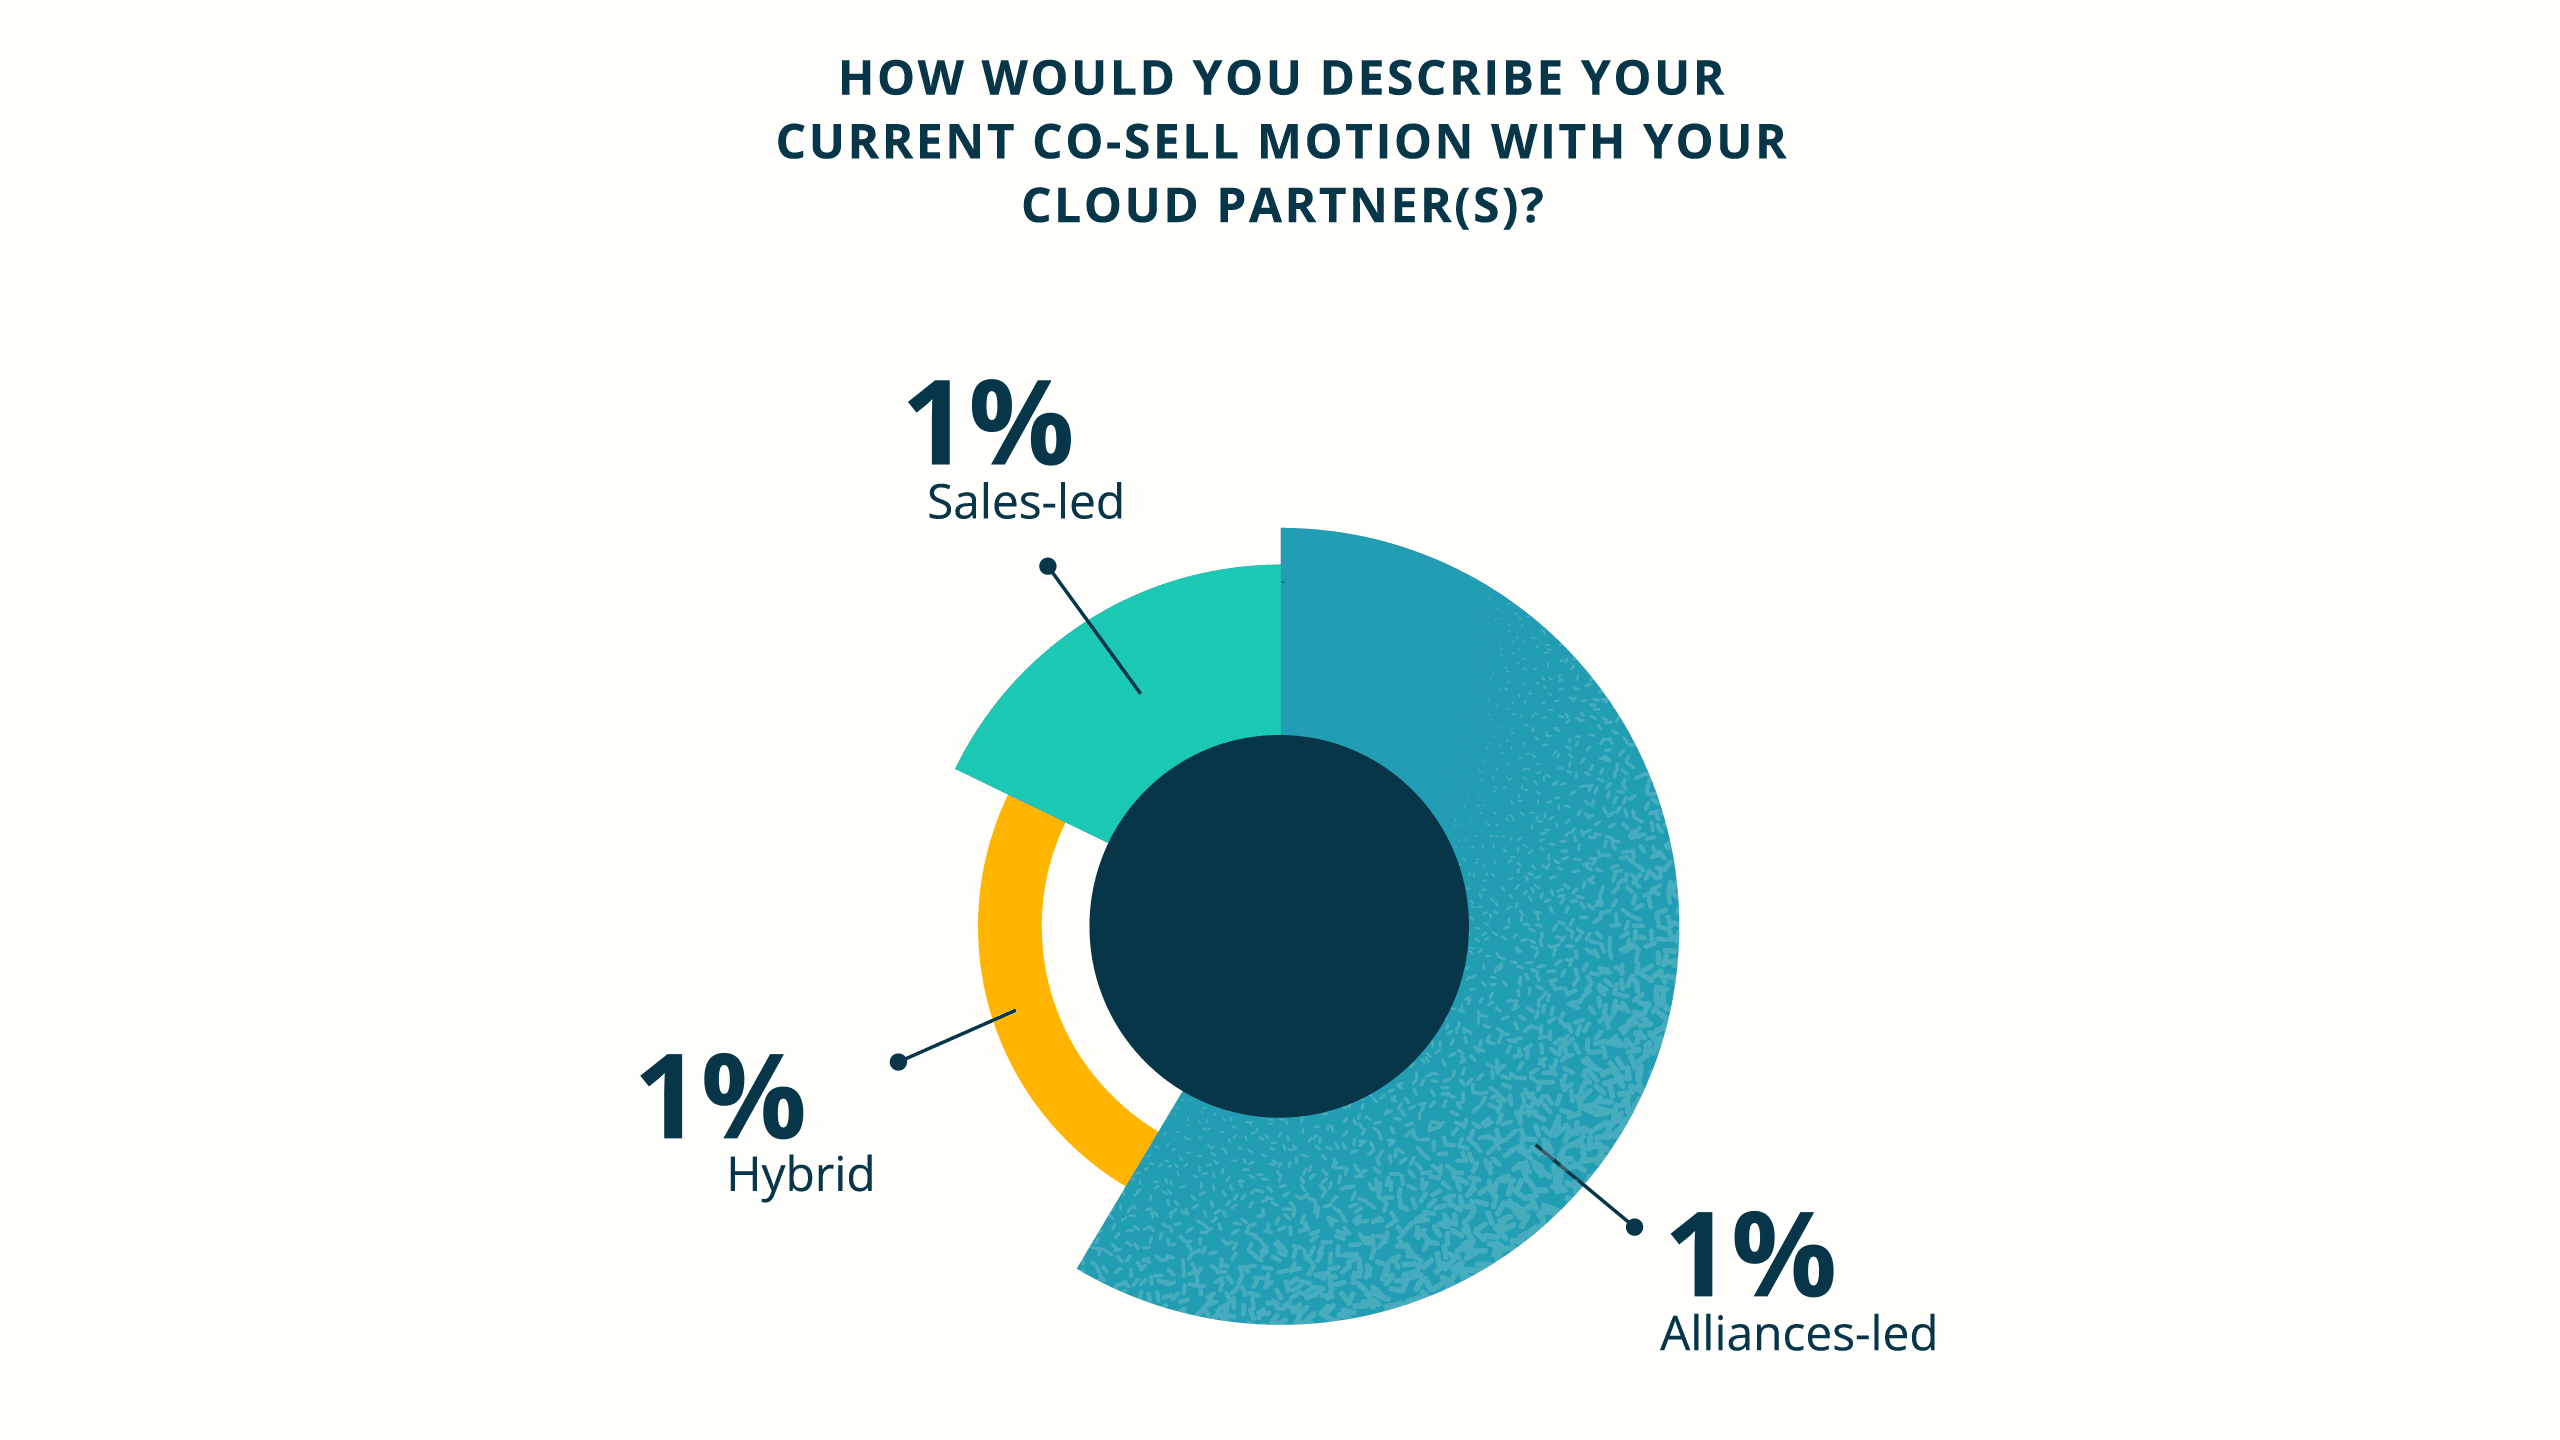 How would you describe your current co-sell motion with your cloud partner